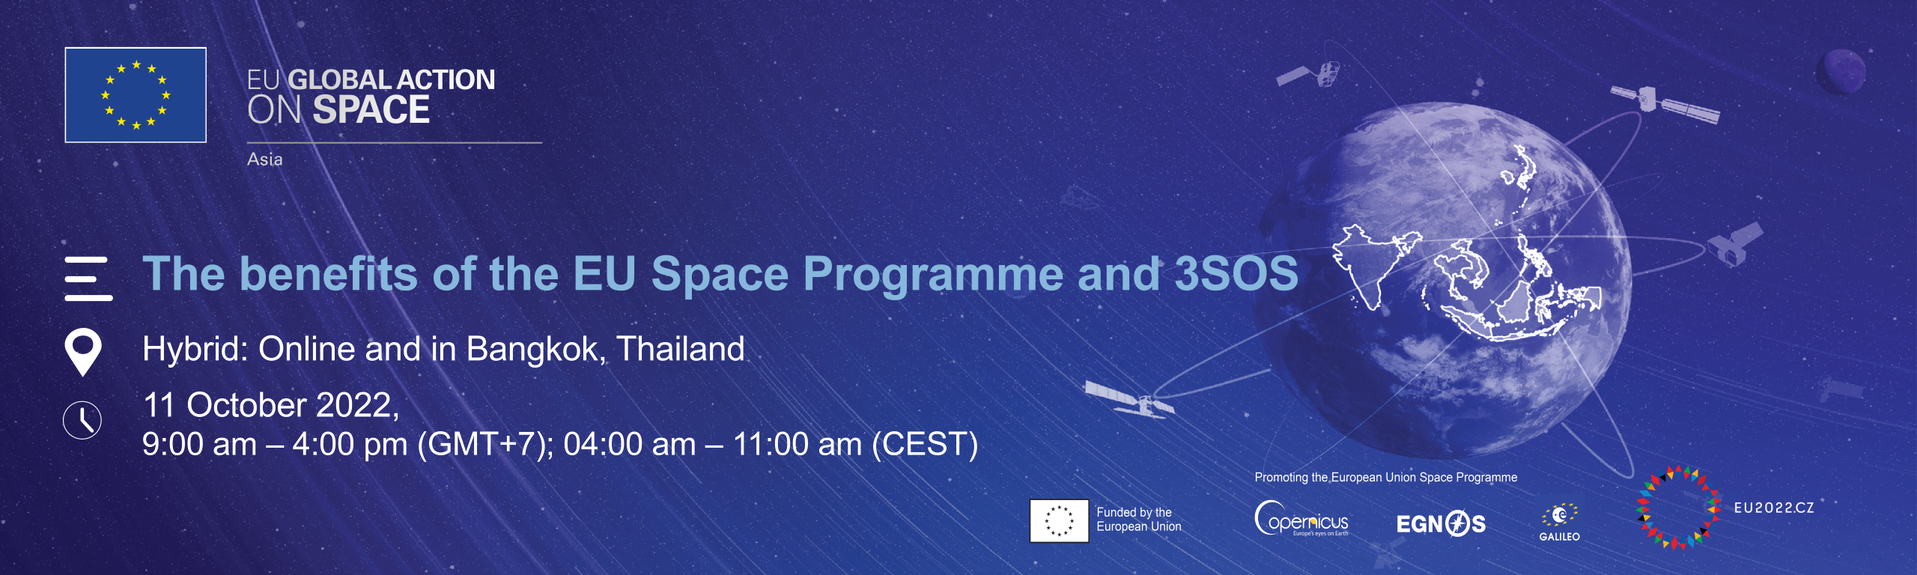 The benefits of the EU Space Programme and 3SOS